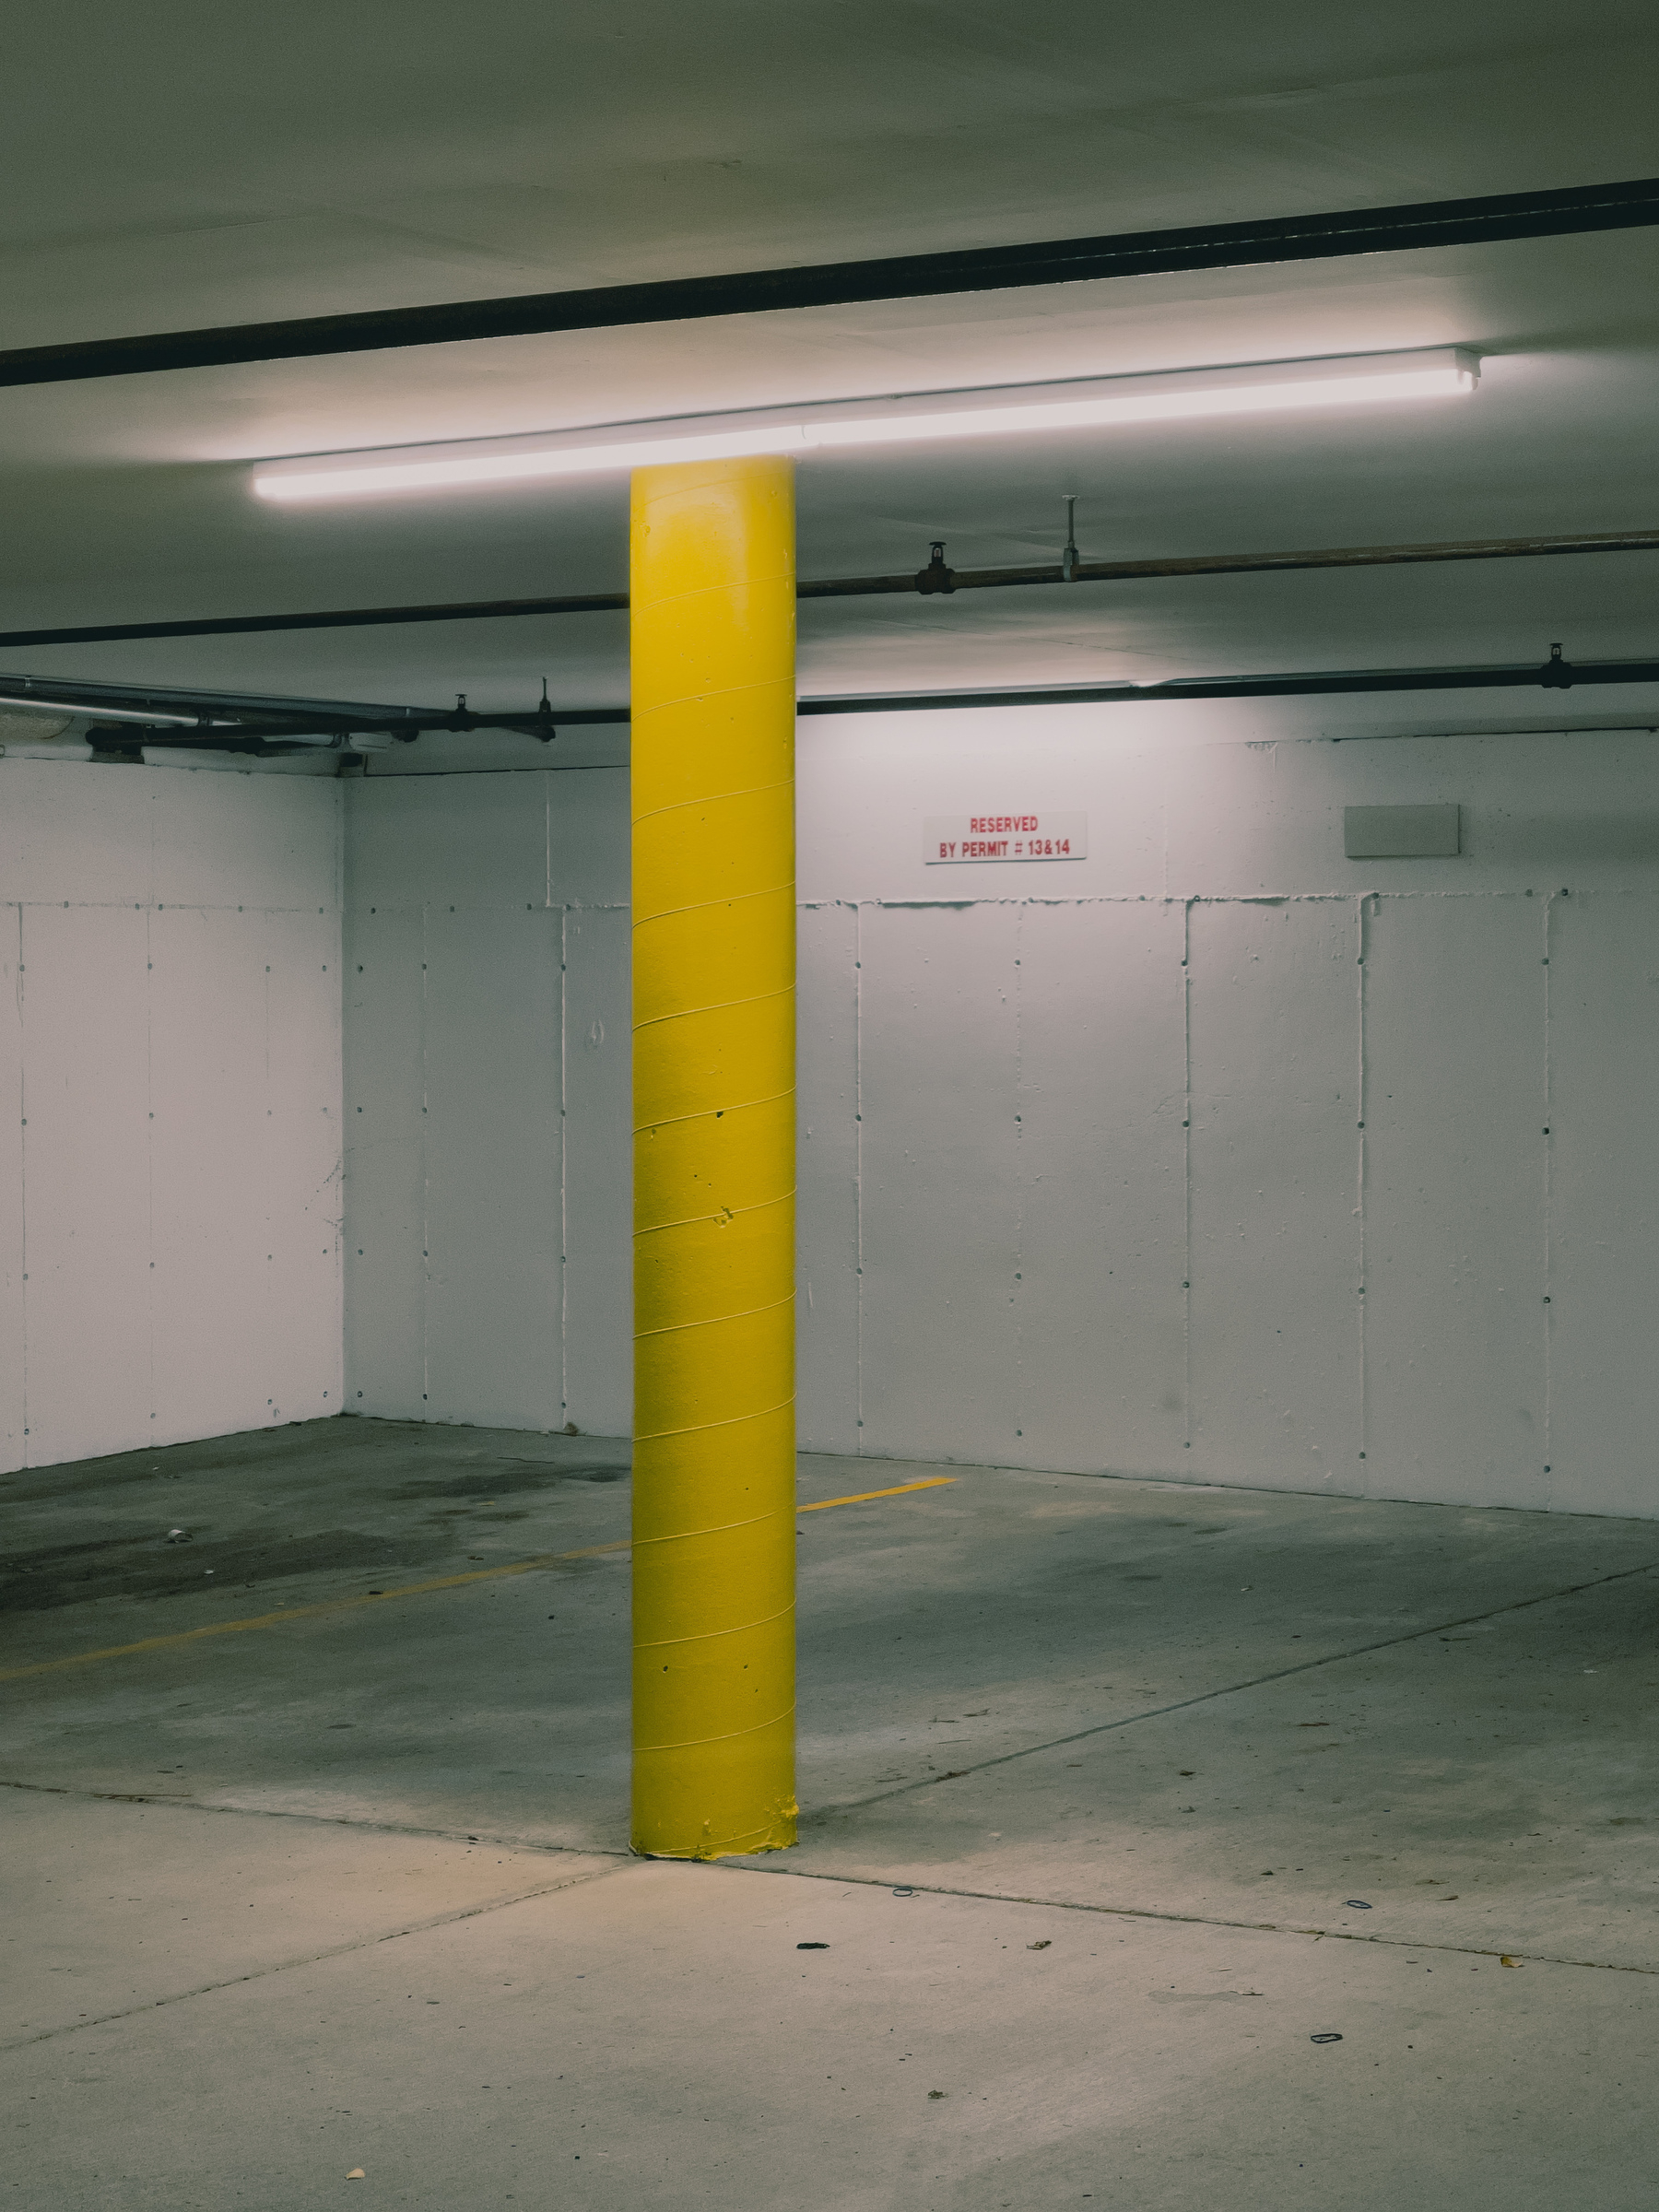 Corner of a parking garage with column painted yellow and fluorescent striplight fixture illuminating the scene.